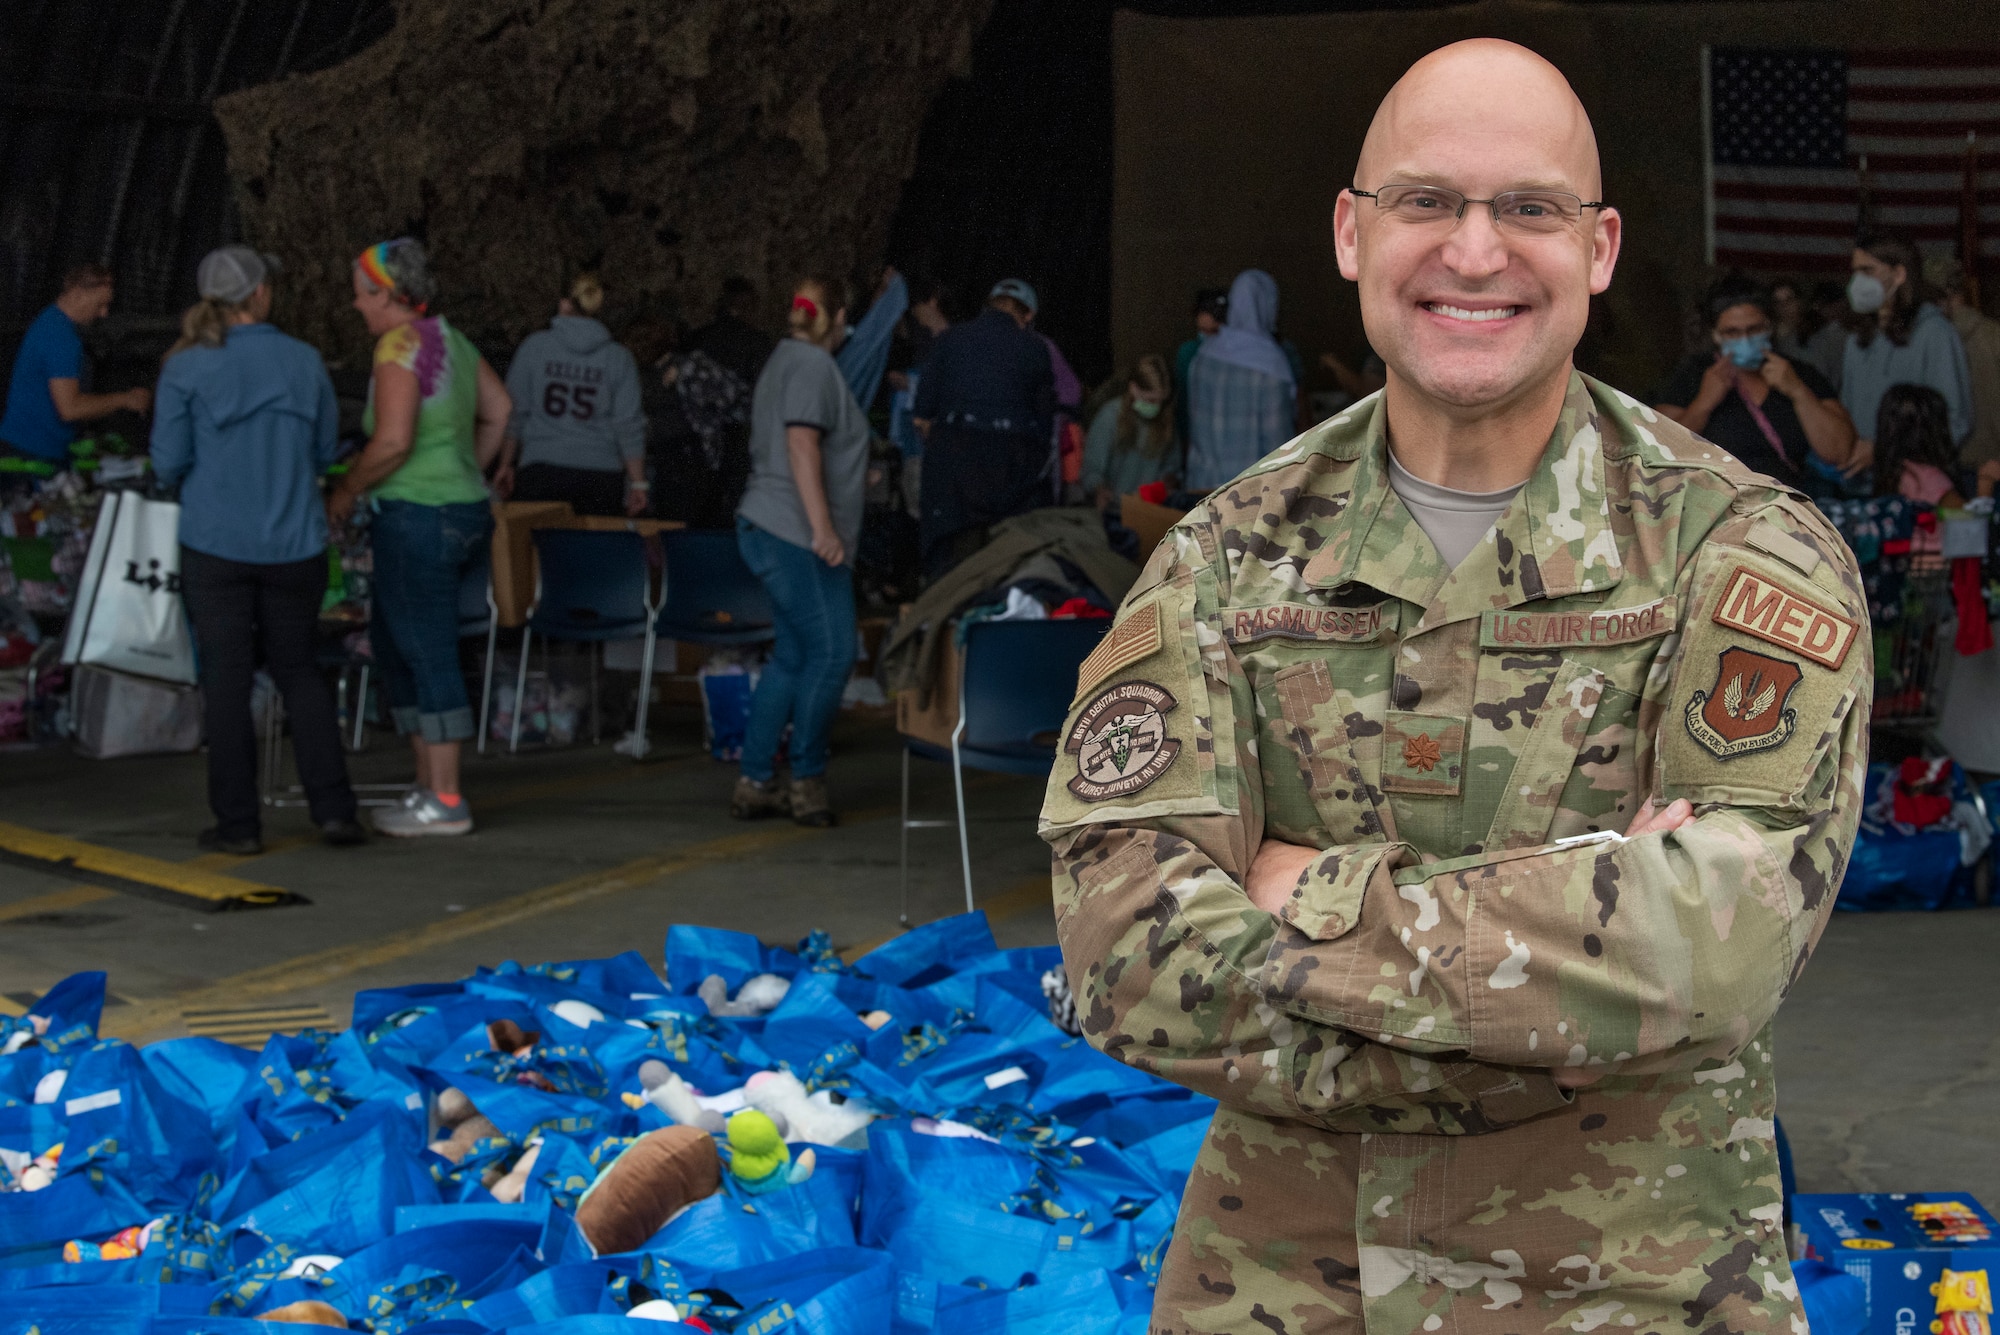 Volunteer poses in front of donations.